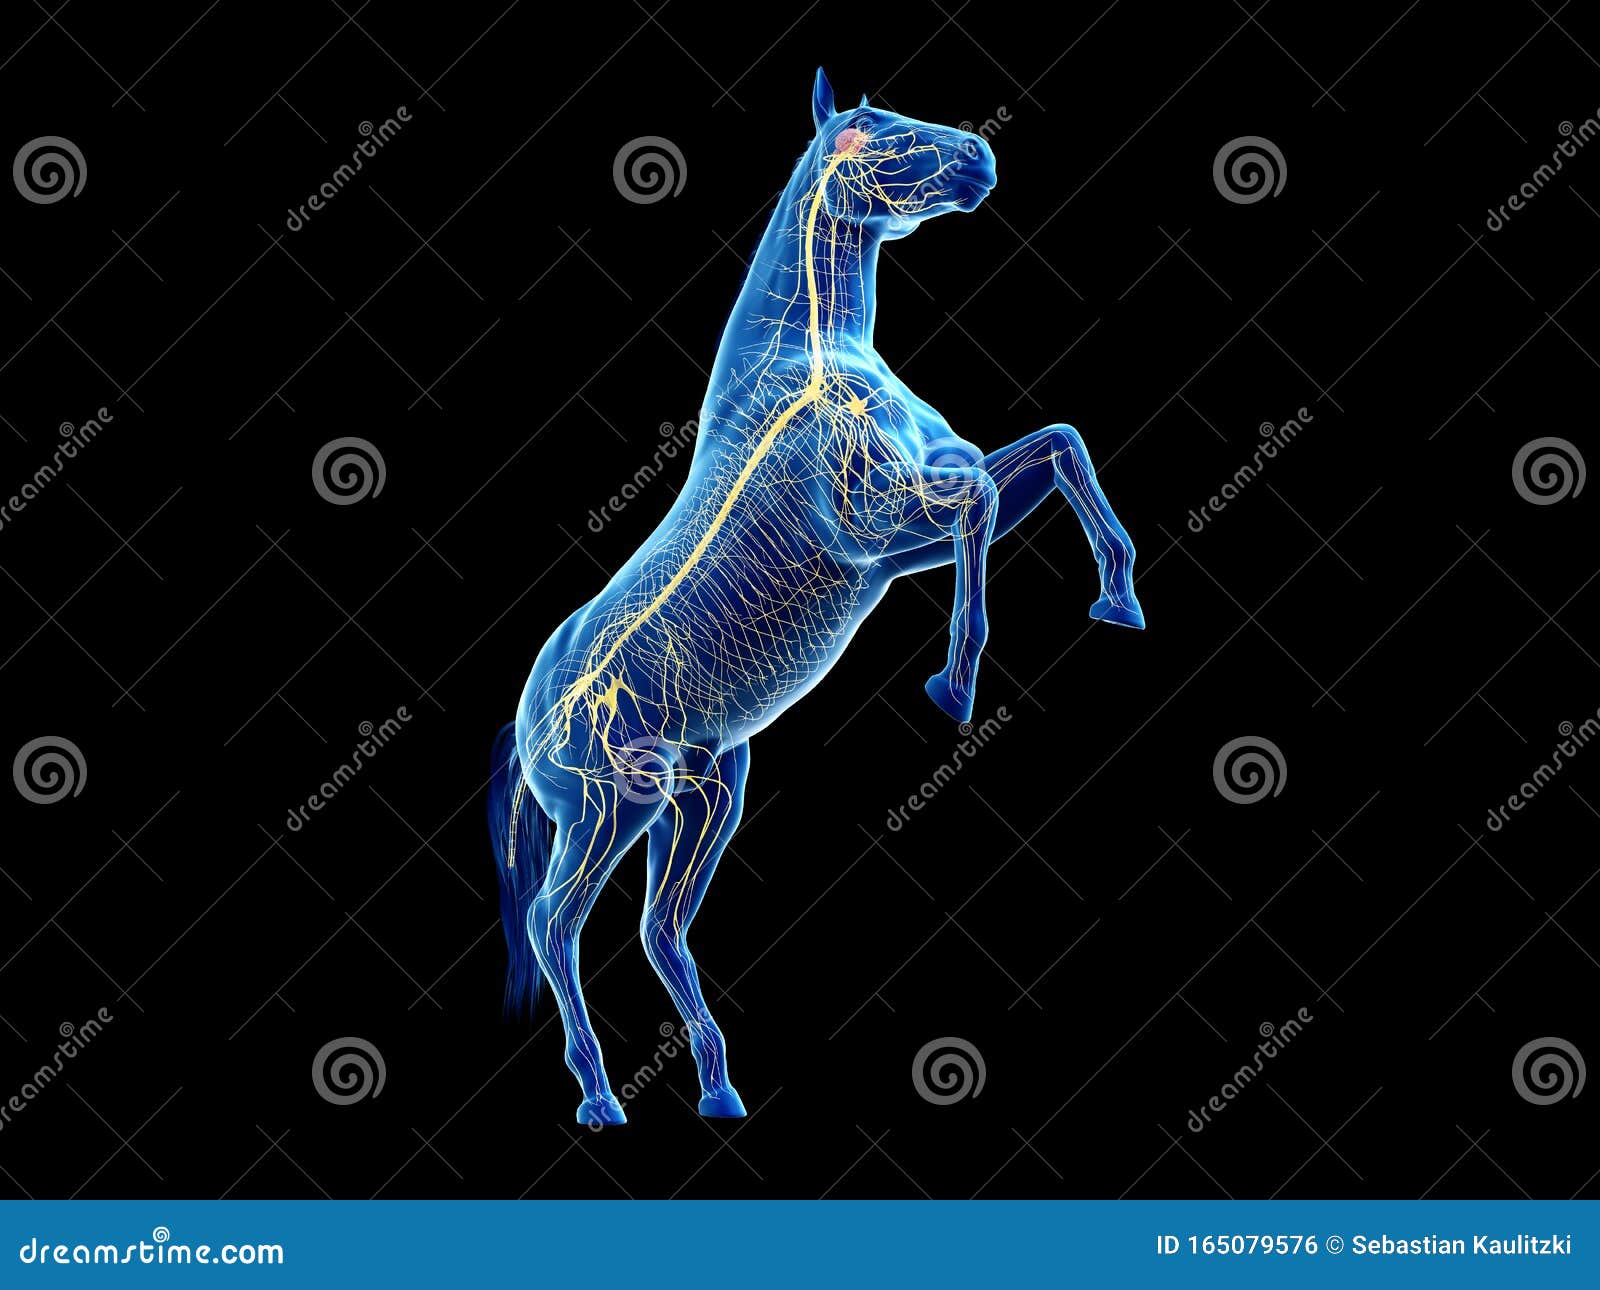 the equine anatomy - the nervous system